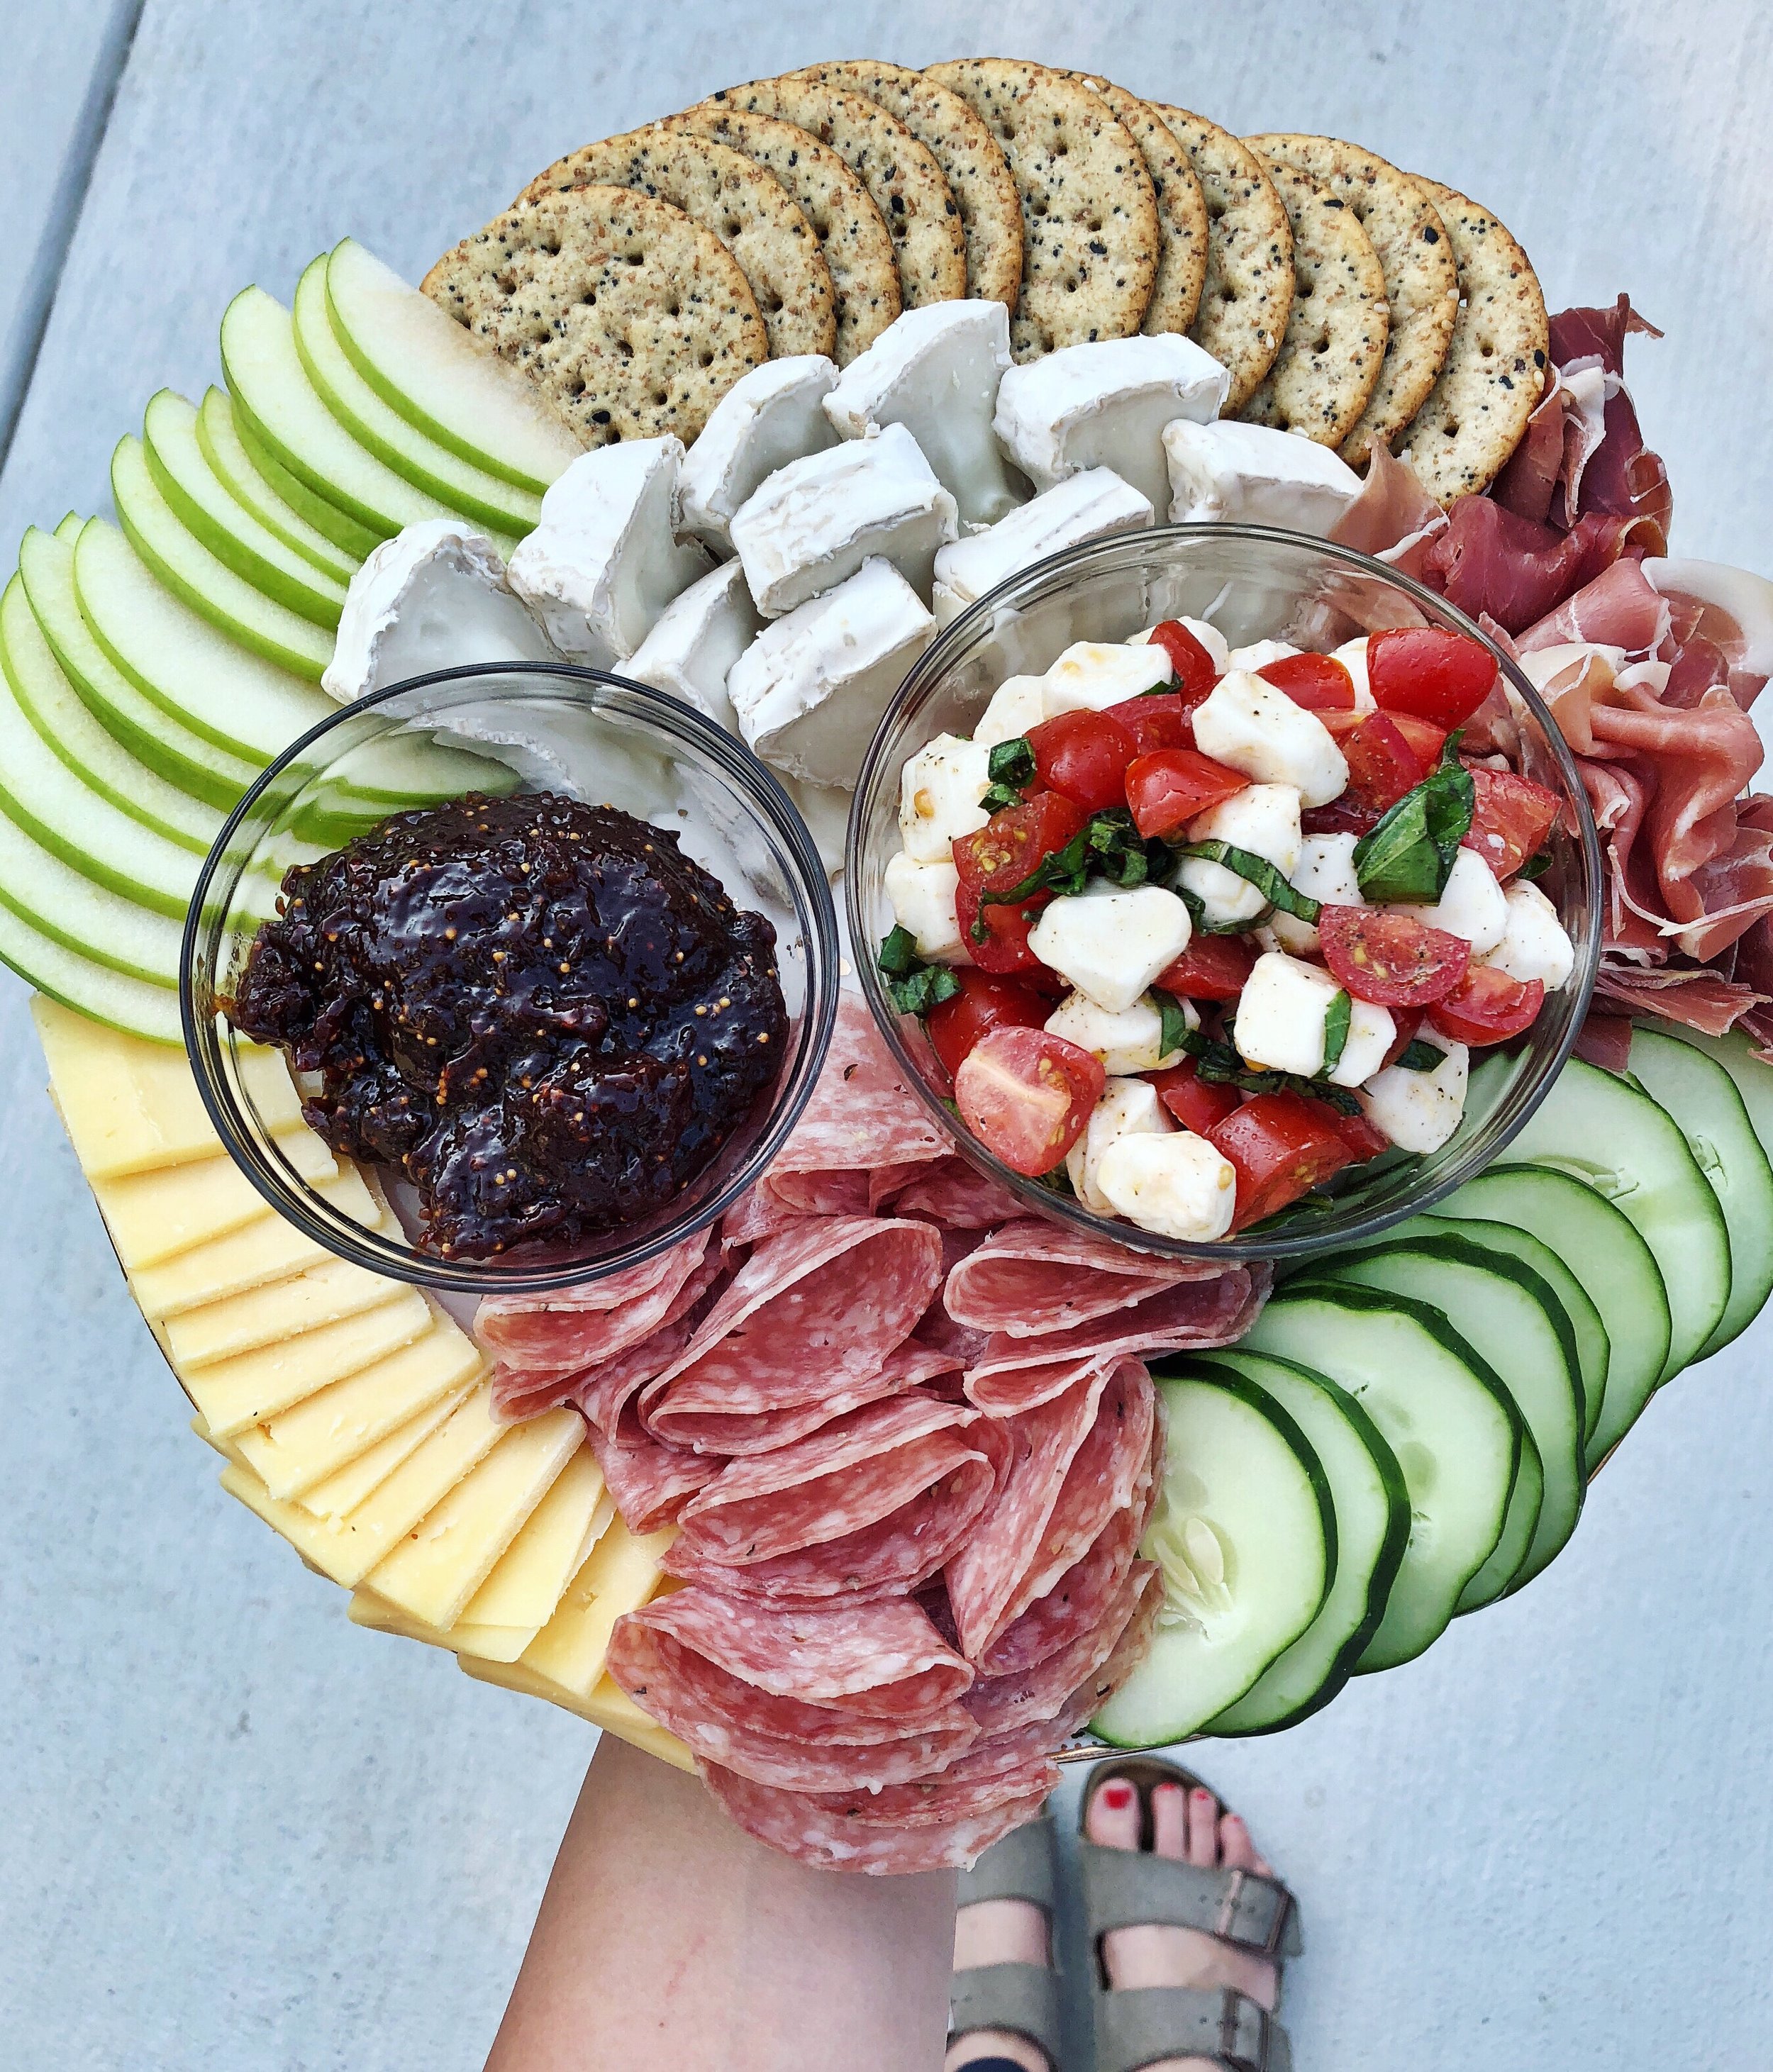 Charcuterie Board Ideas - Everything You Need for a Perfect Cheese Plate